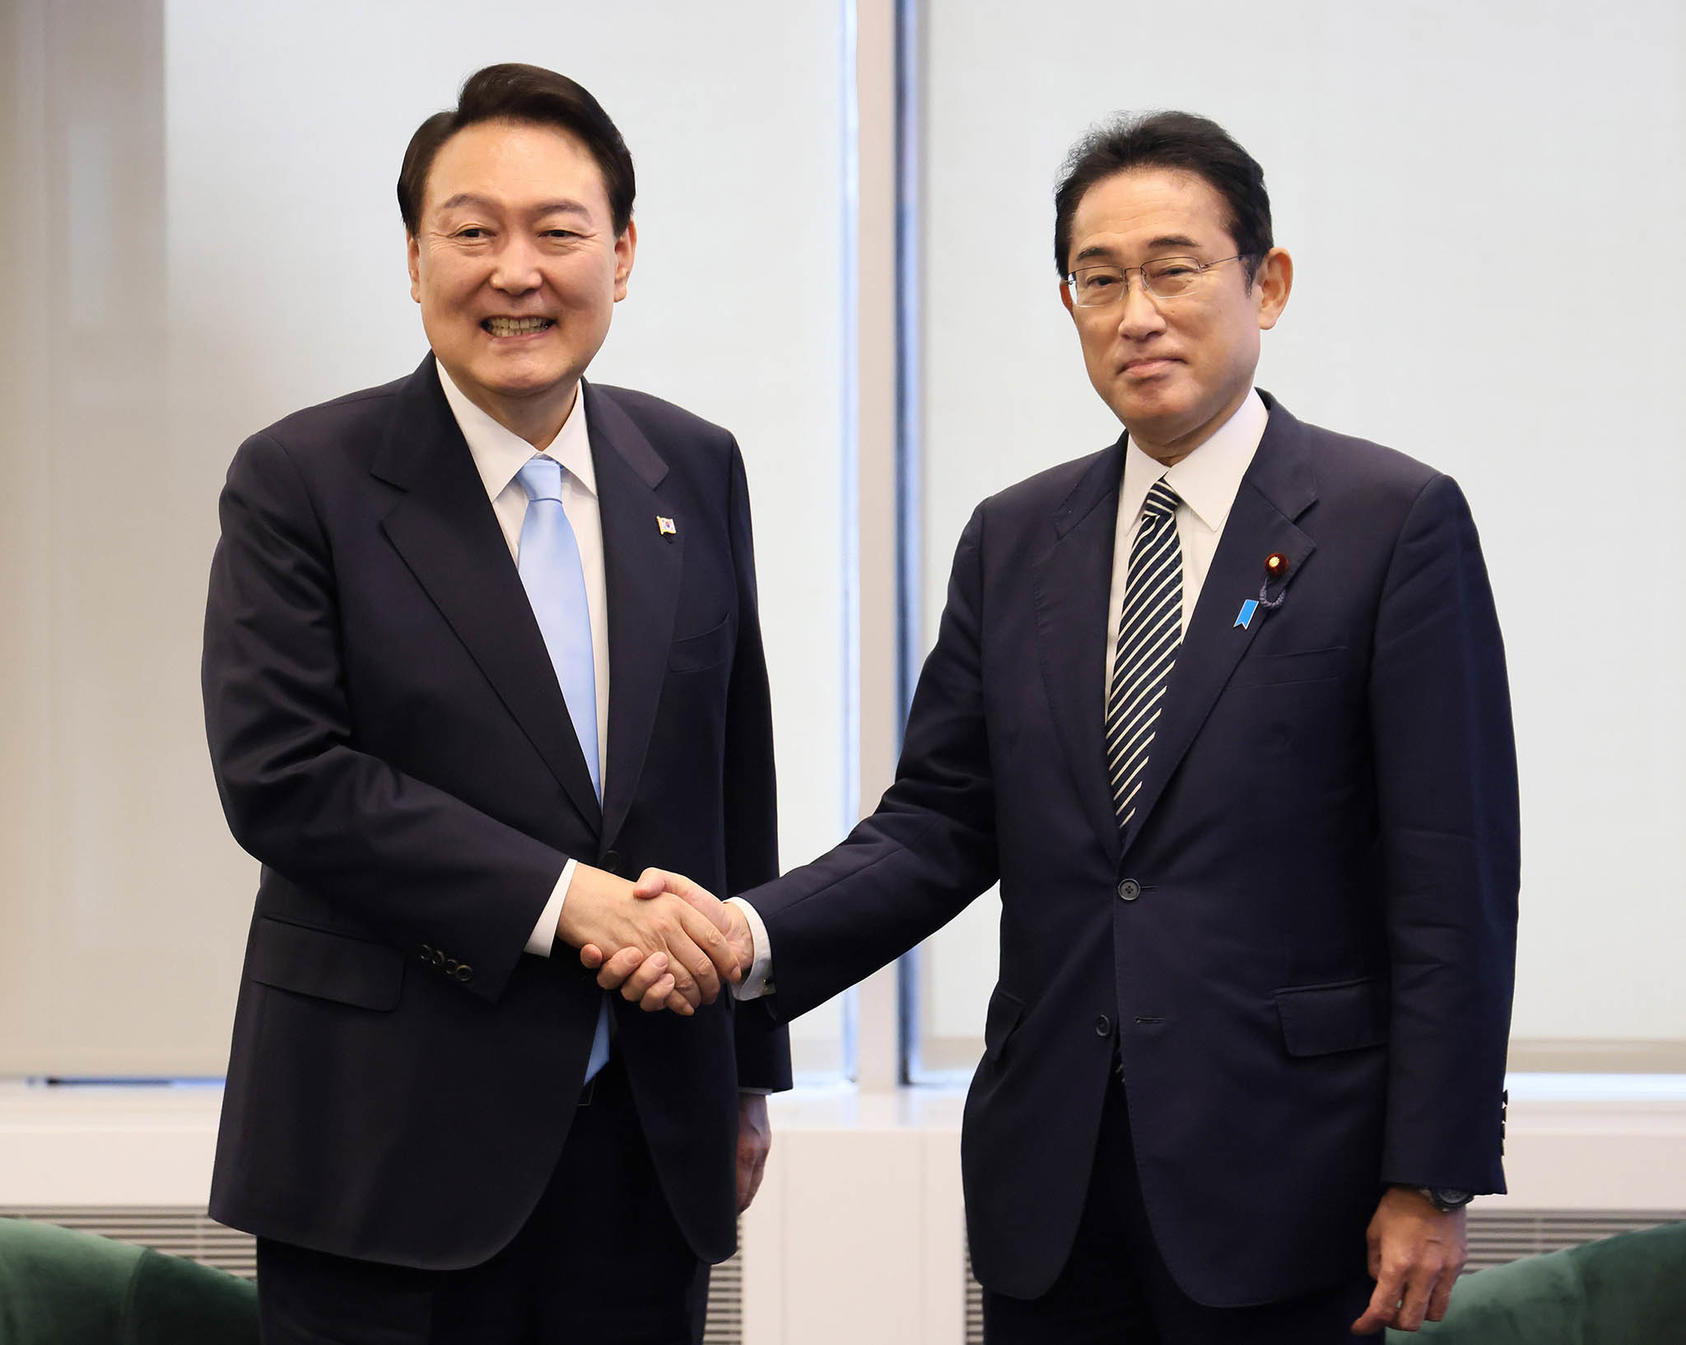 Japanese Prime Minister Fumio Kishida shaking hands with South Korean President Yoon Seong-Yeol in New York City. September 21, 2020. (Office of the Prime Minister of Japan)